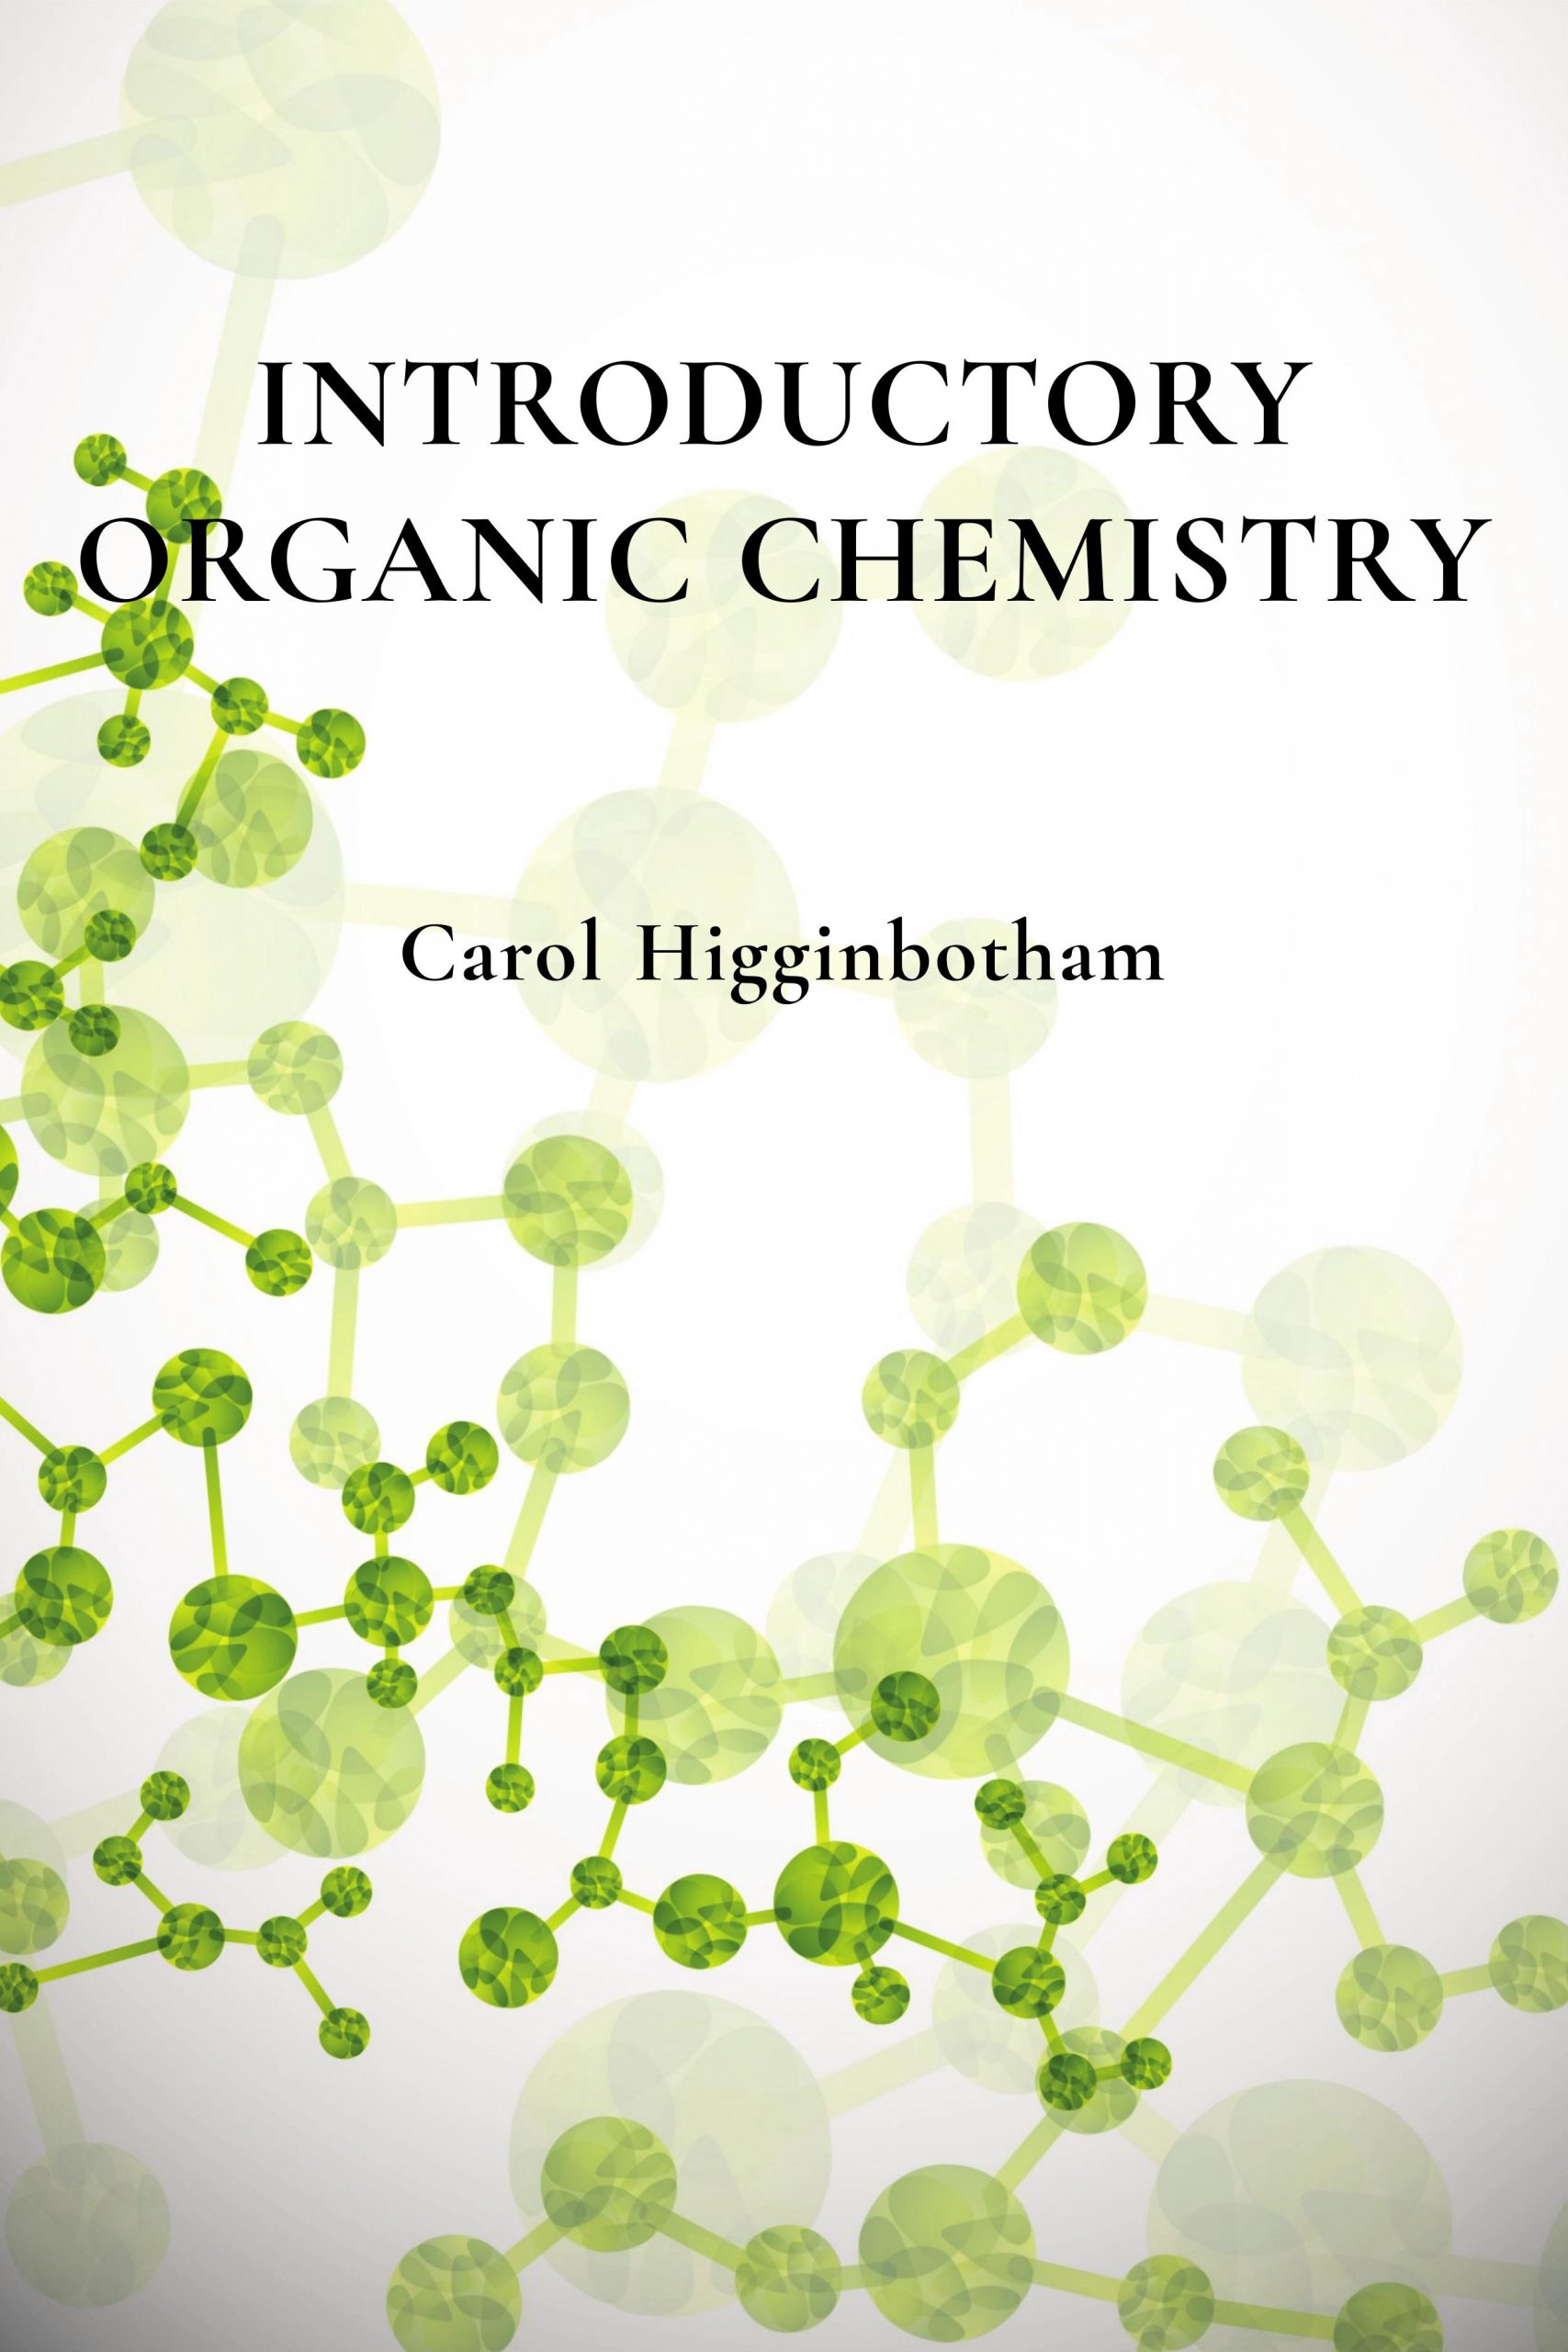 Introductory Organic Chemistry